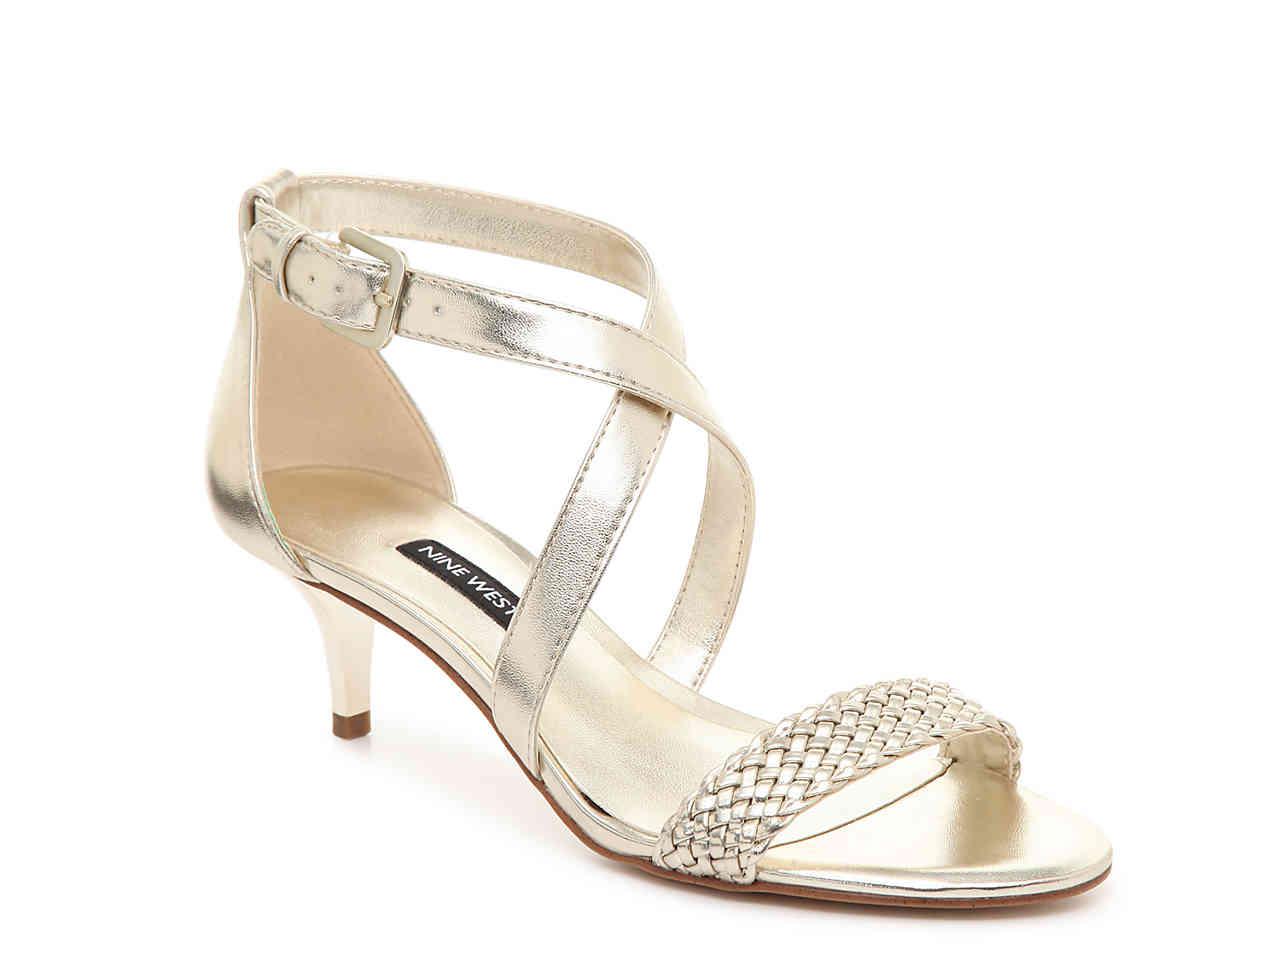 Nine West Lachlan Sandal in Gold 